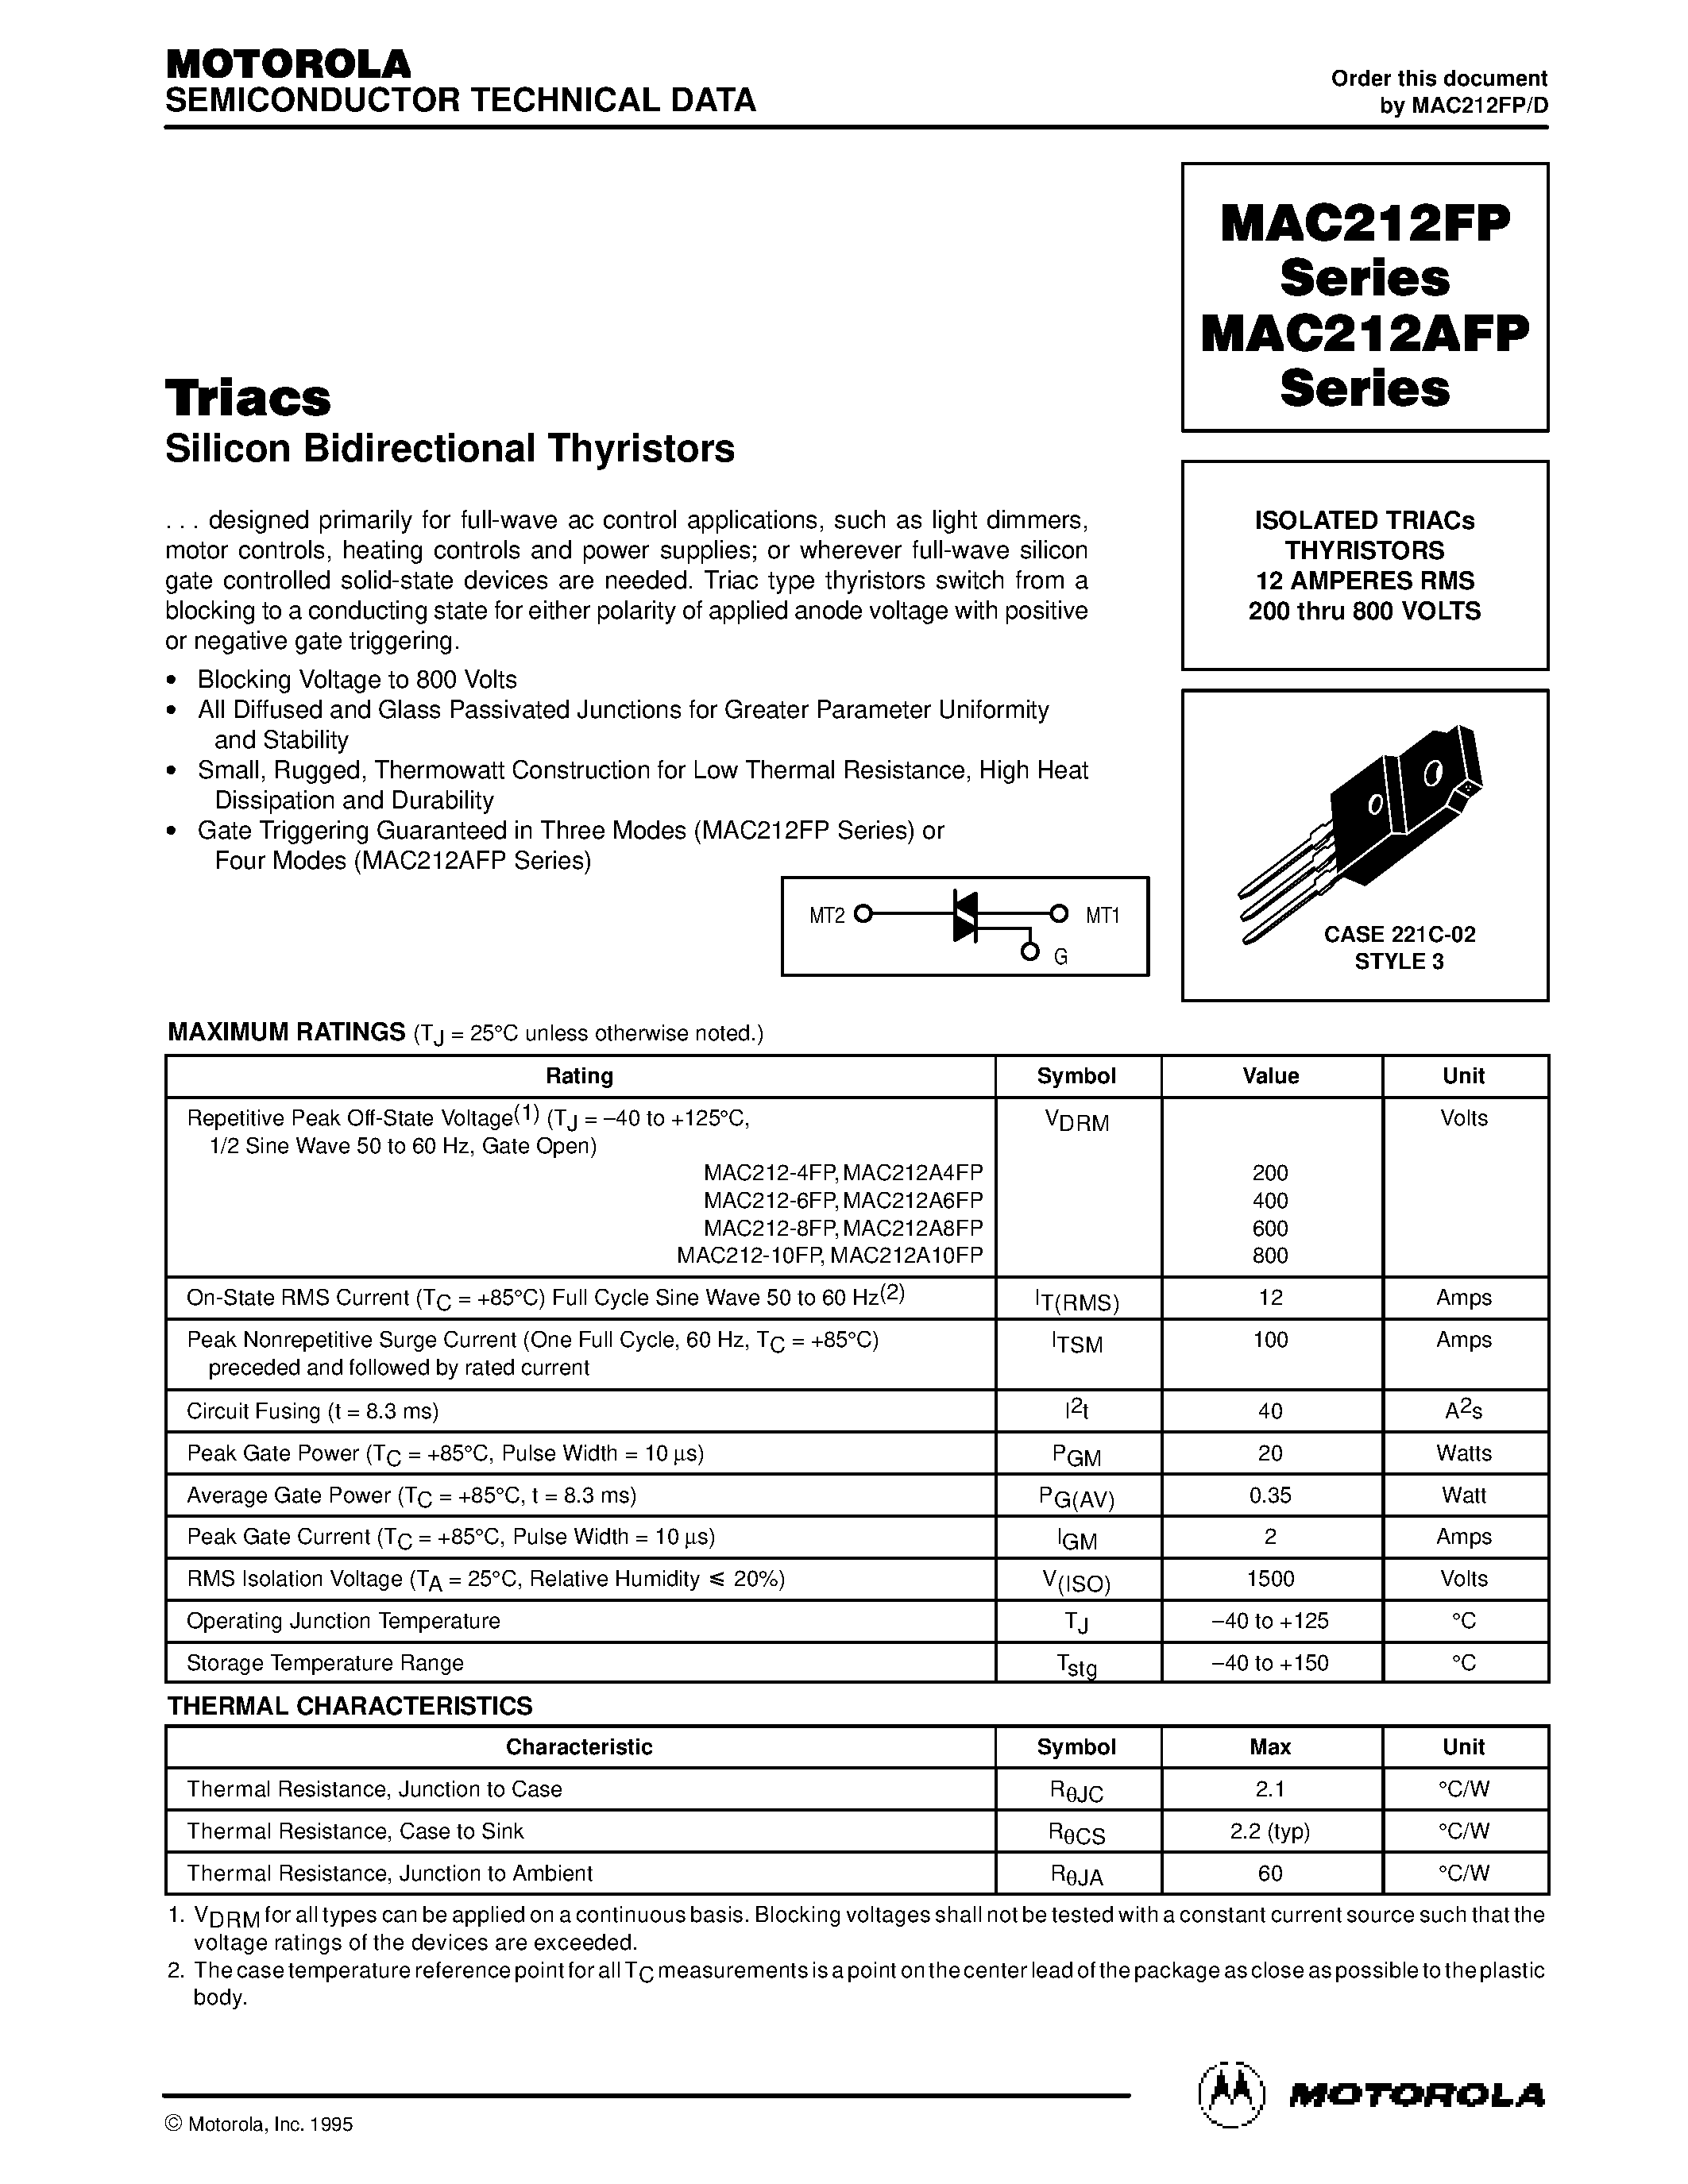 Datasheet MAC212-8FP - ISOLATED TRIACs THYRISTORS 12 AMPERES RMS 200 thru 800 VOLTS page 1